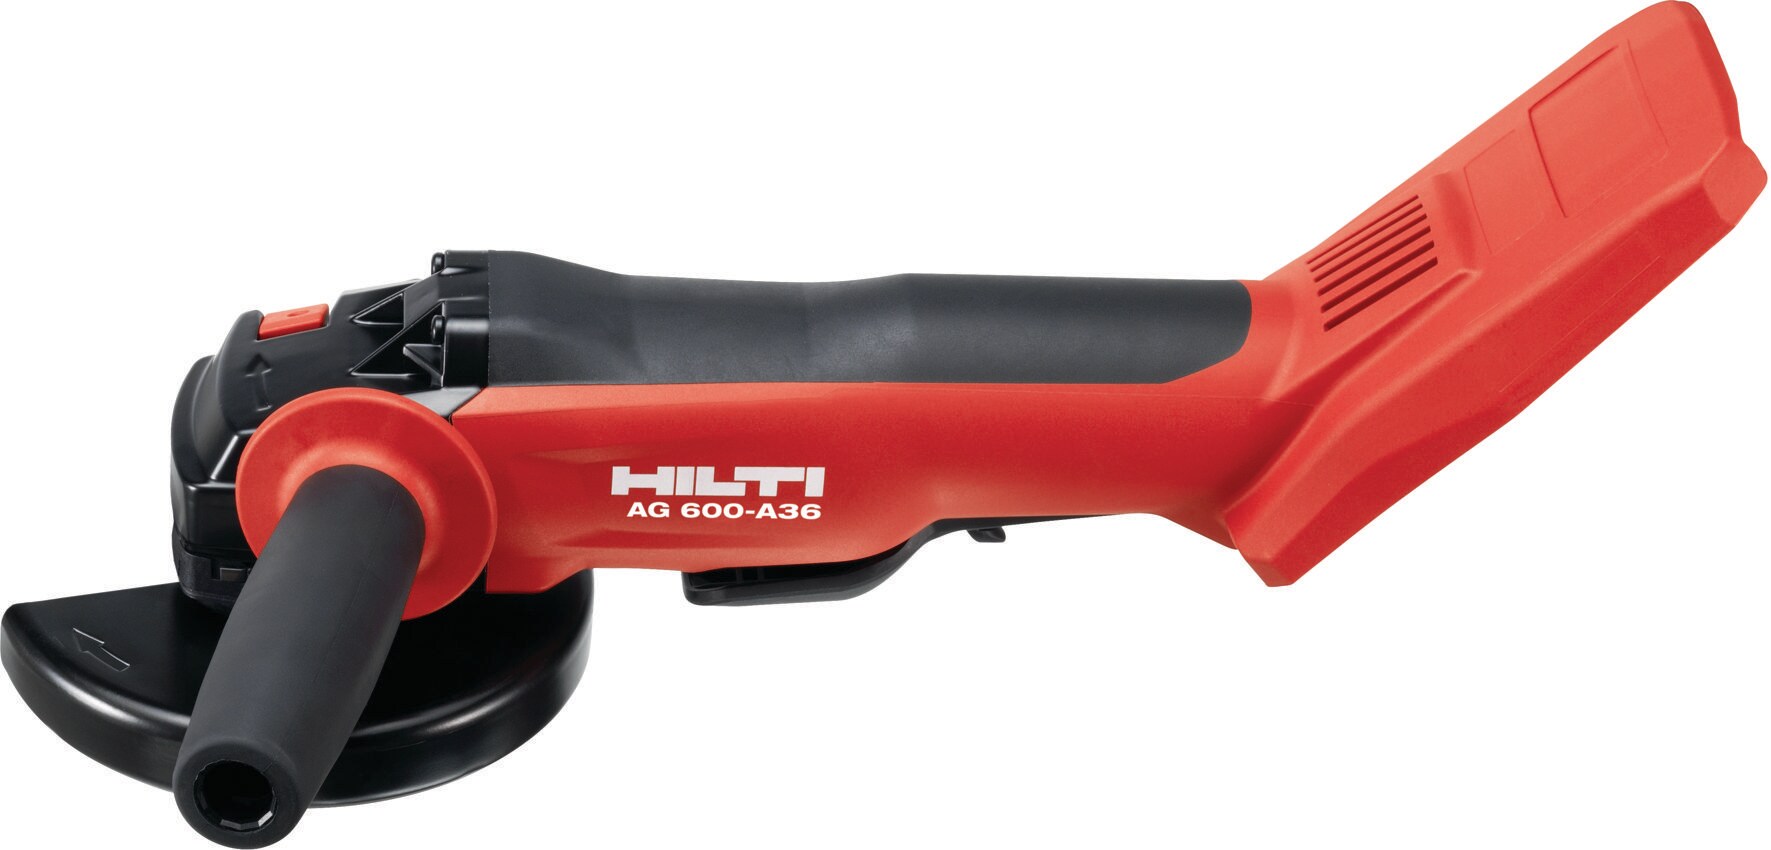 TOOL ONLY. NEW Hilti HILTI AG 600-A36 CORDLESS ANGLE GRINDER 